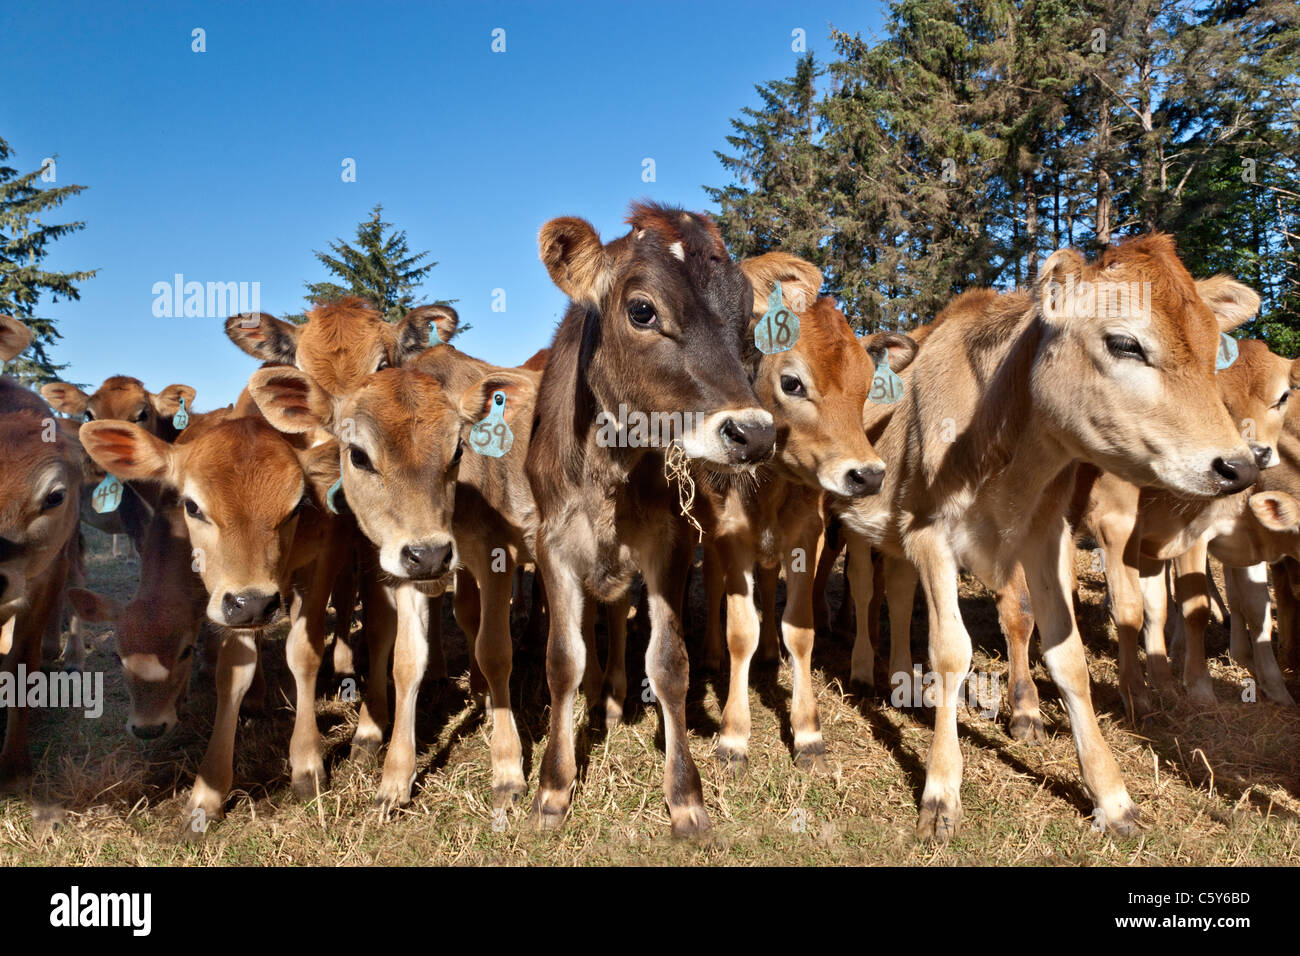 Weaned, curious Jersey calves, Stock Photo